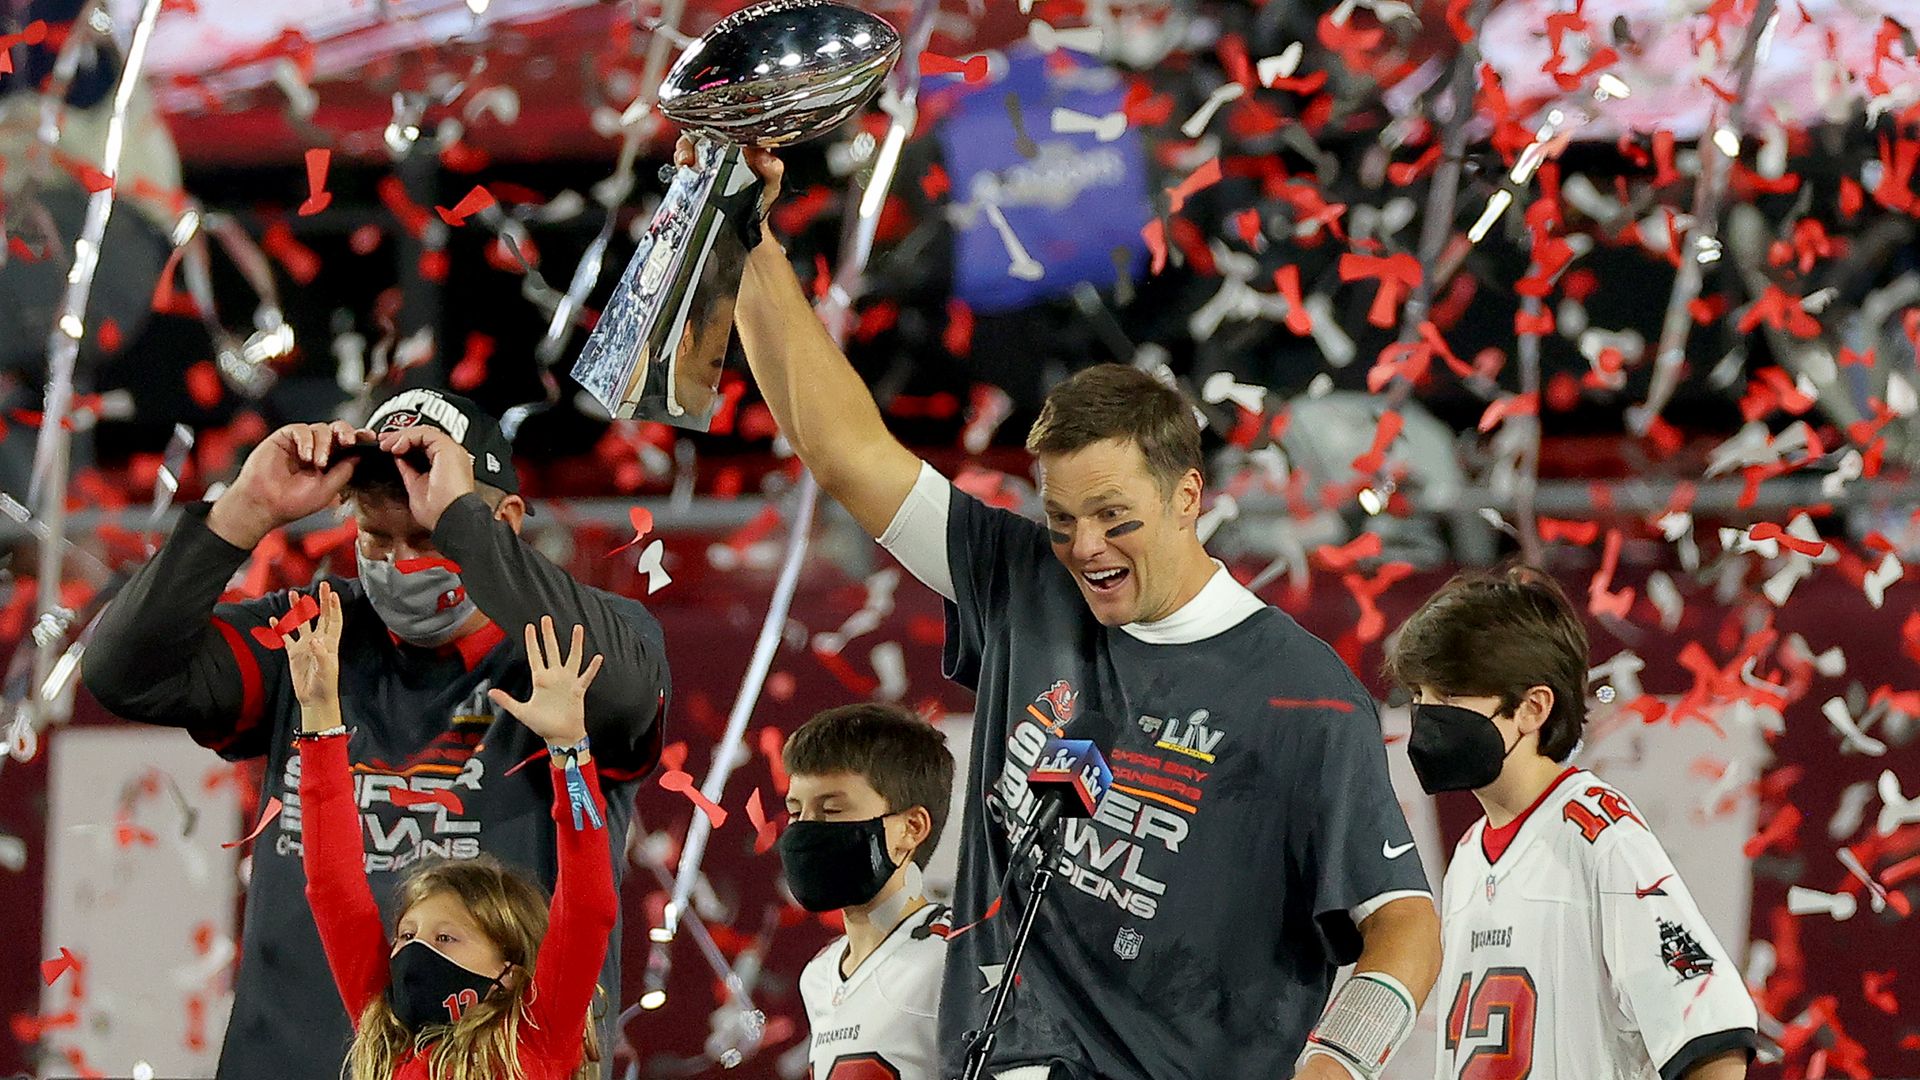  Tom Brady #12 of the Tampa Bay Buccaneers celebrates with the Lombardi Trophy after defeating the Kansas City Chiefs in Super Bowl LV at Raymond James Stadium on February 07, 2021 in Tampa, Florida. 